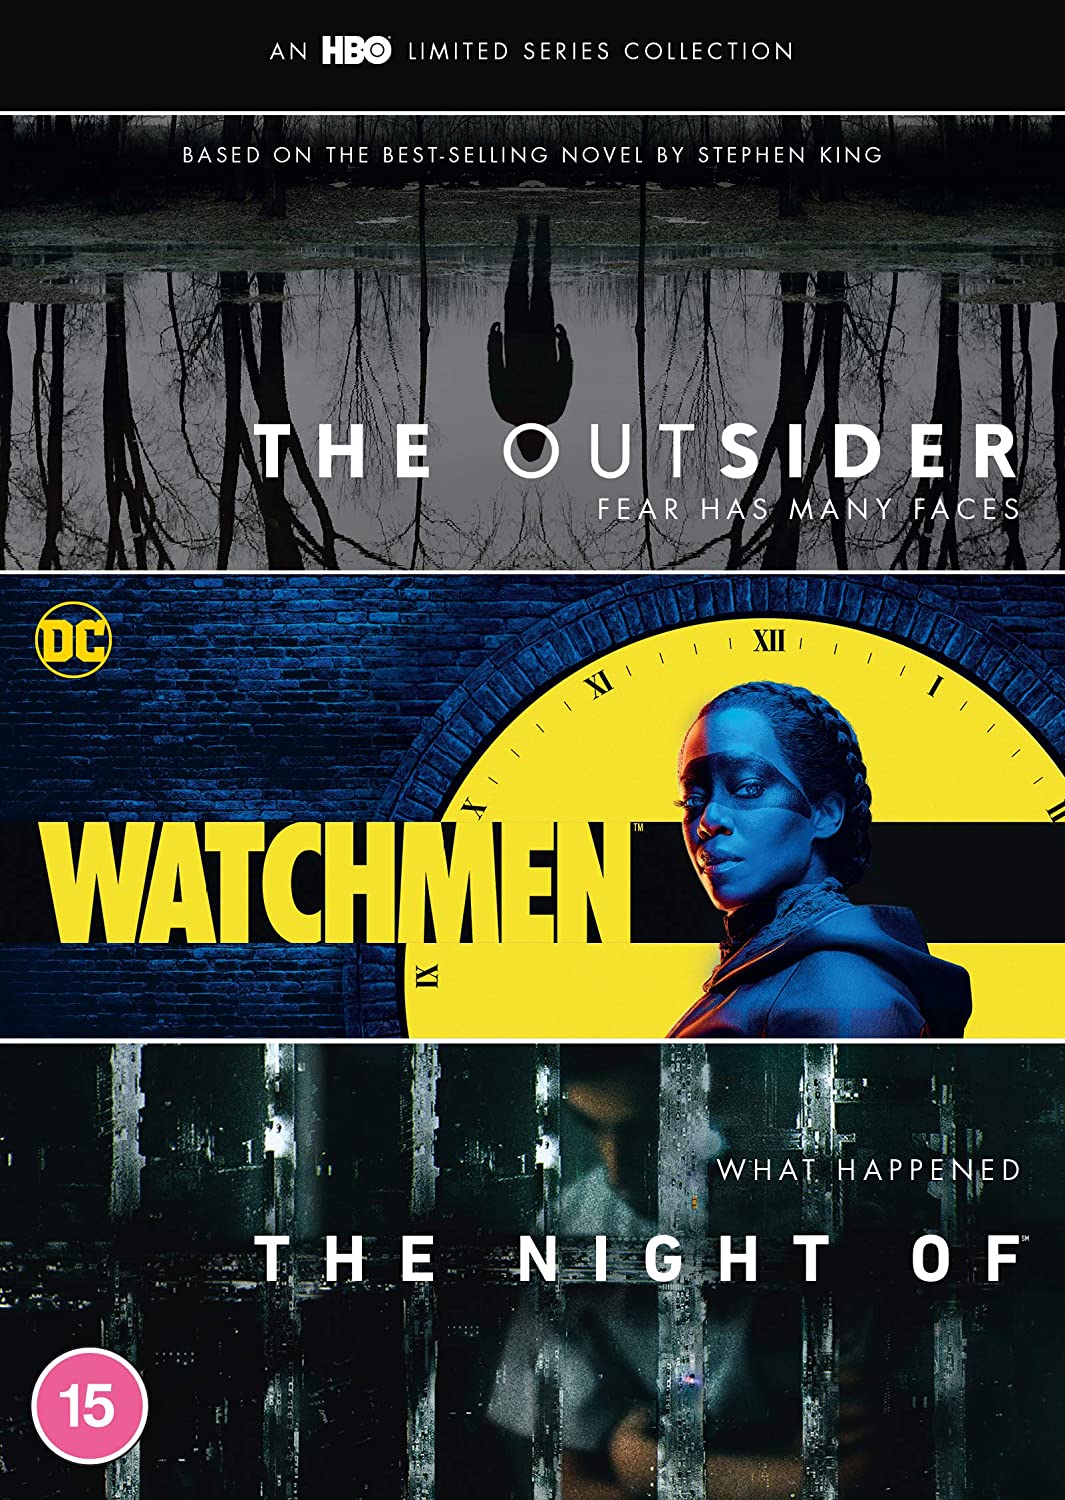 An HBO Limited Series Collection [The Outsider / Watchmen / The Night Of] [2020] (DVD)